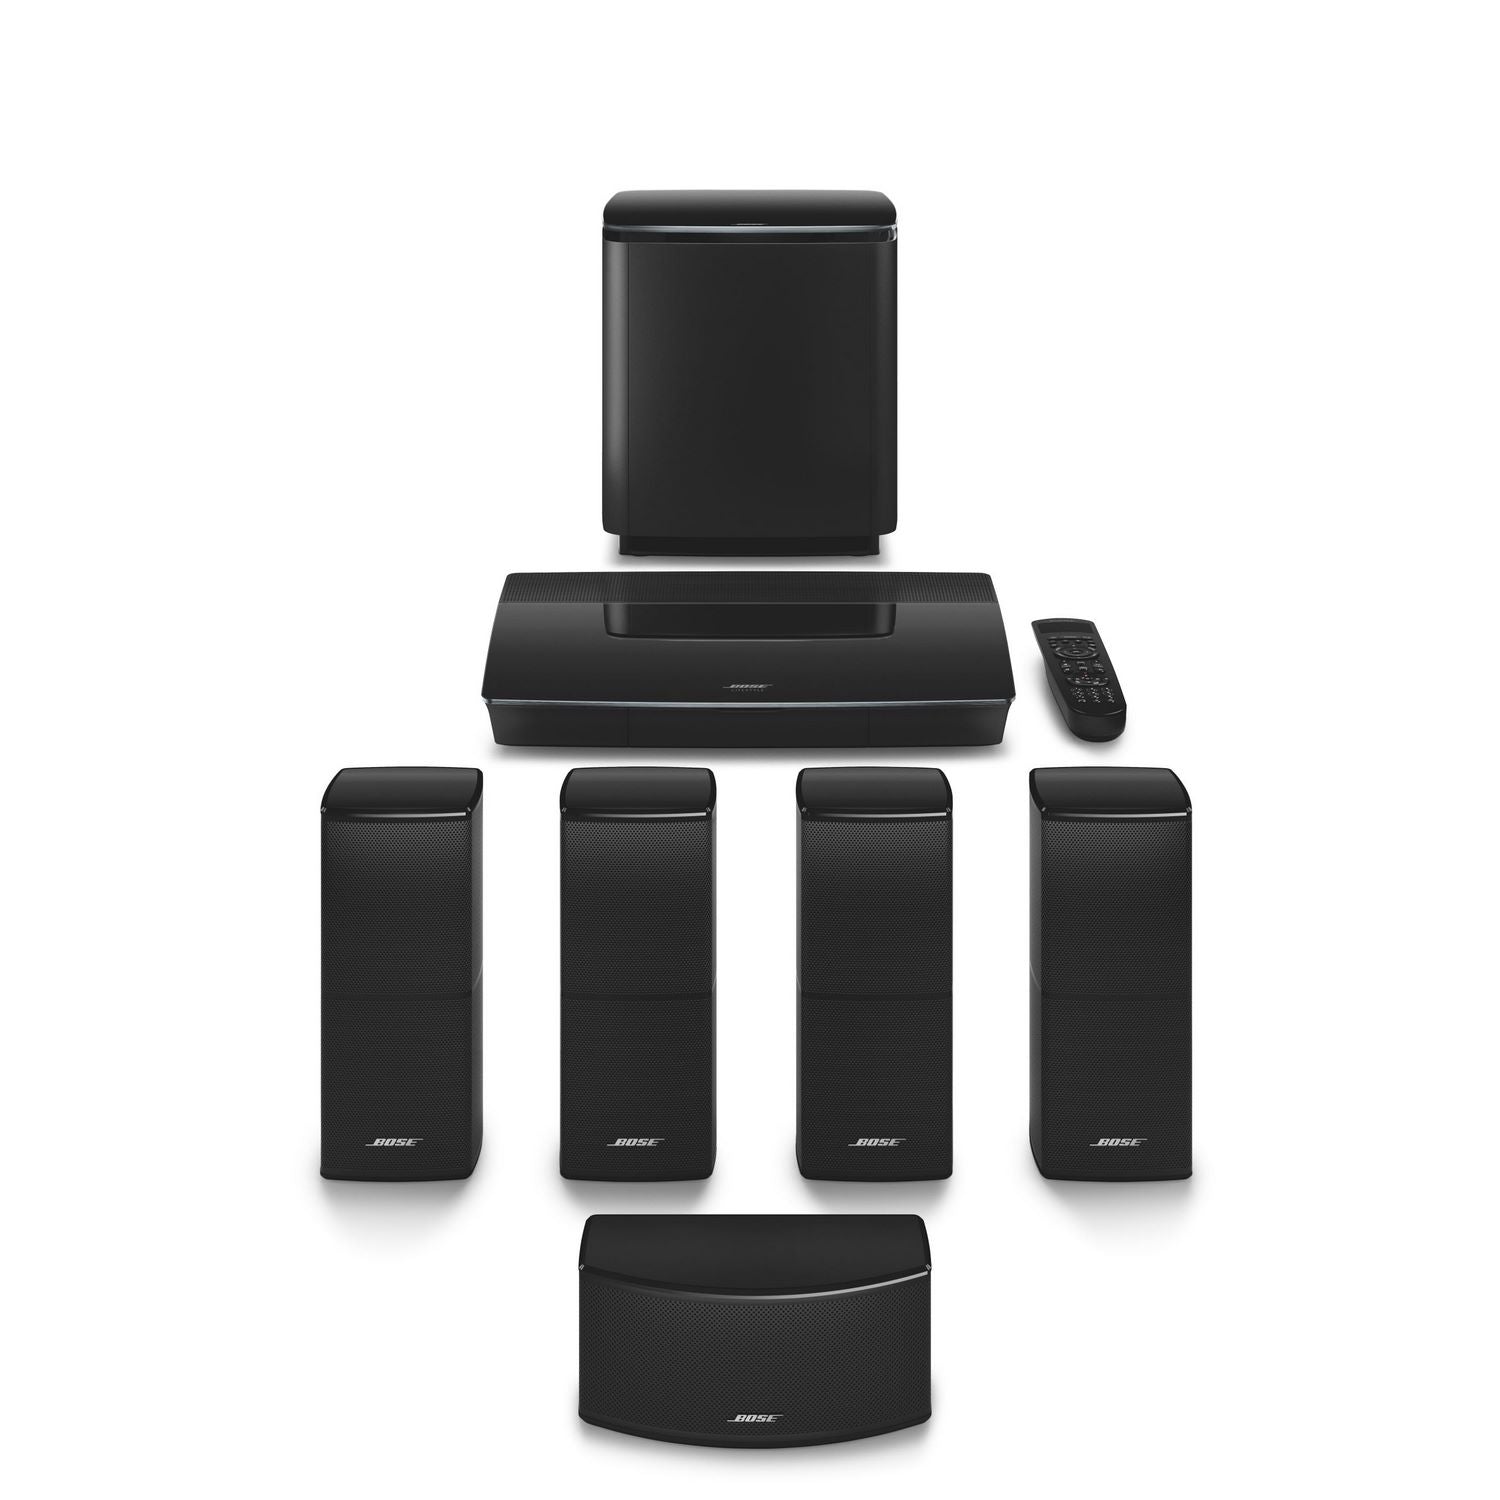 bose music system home theater